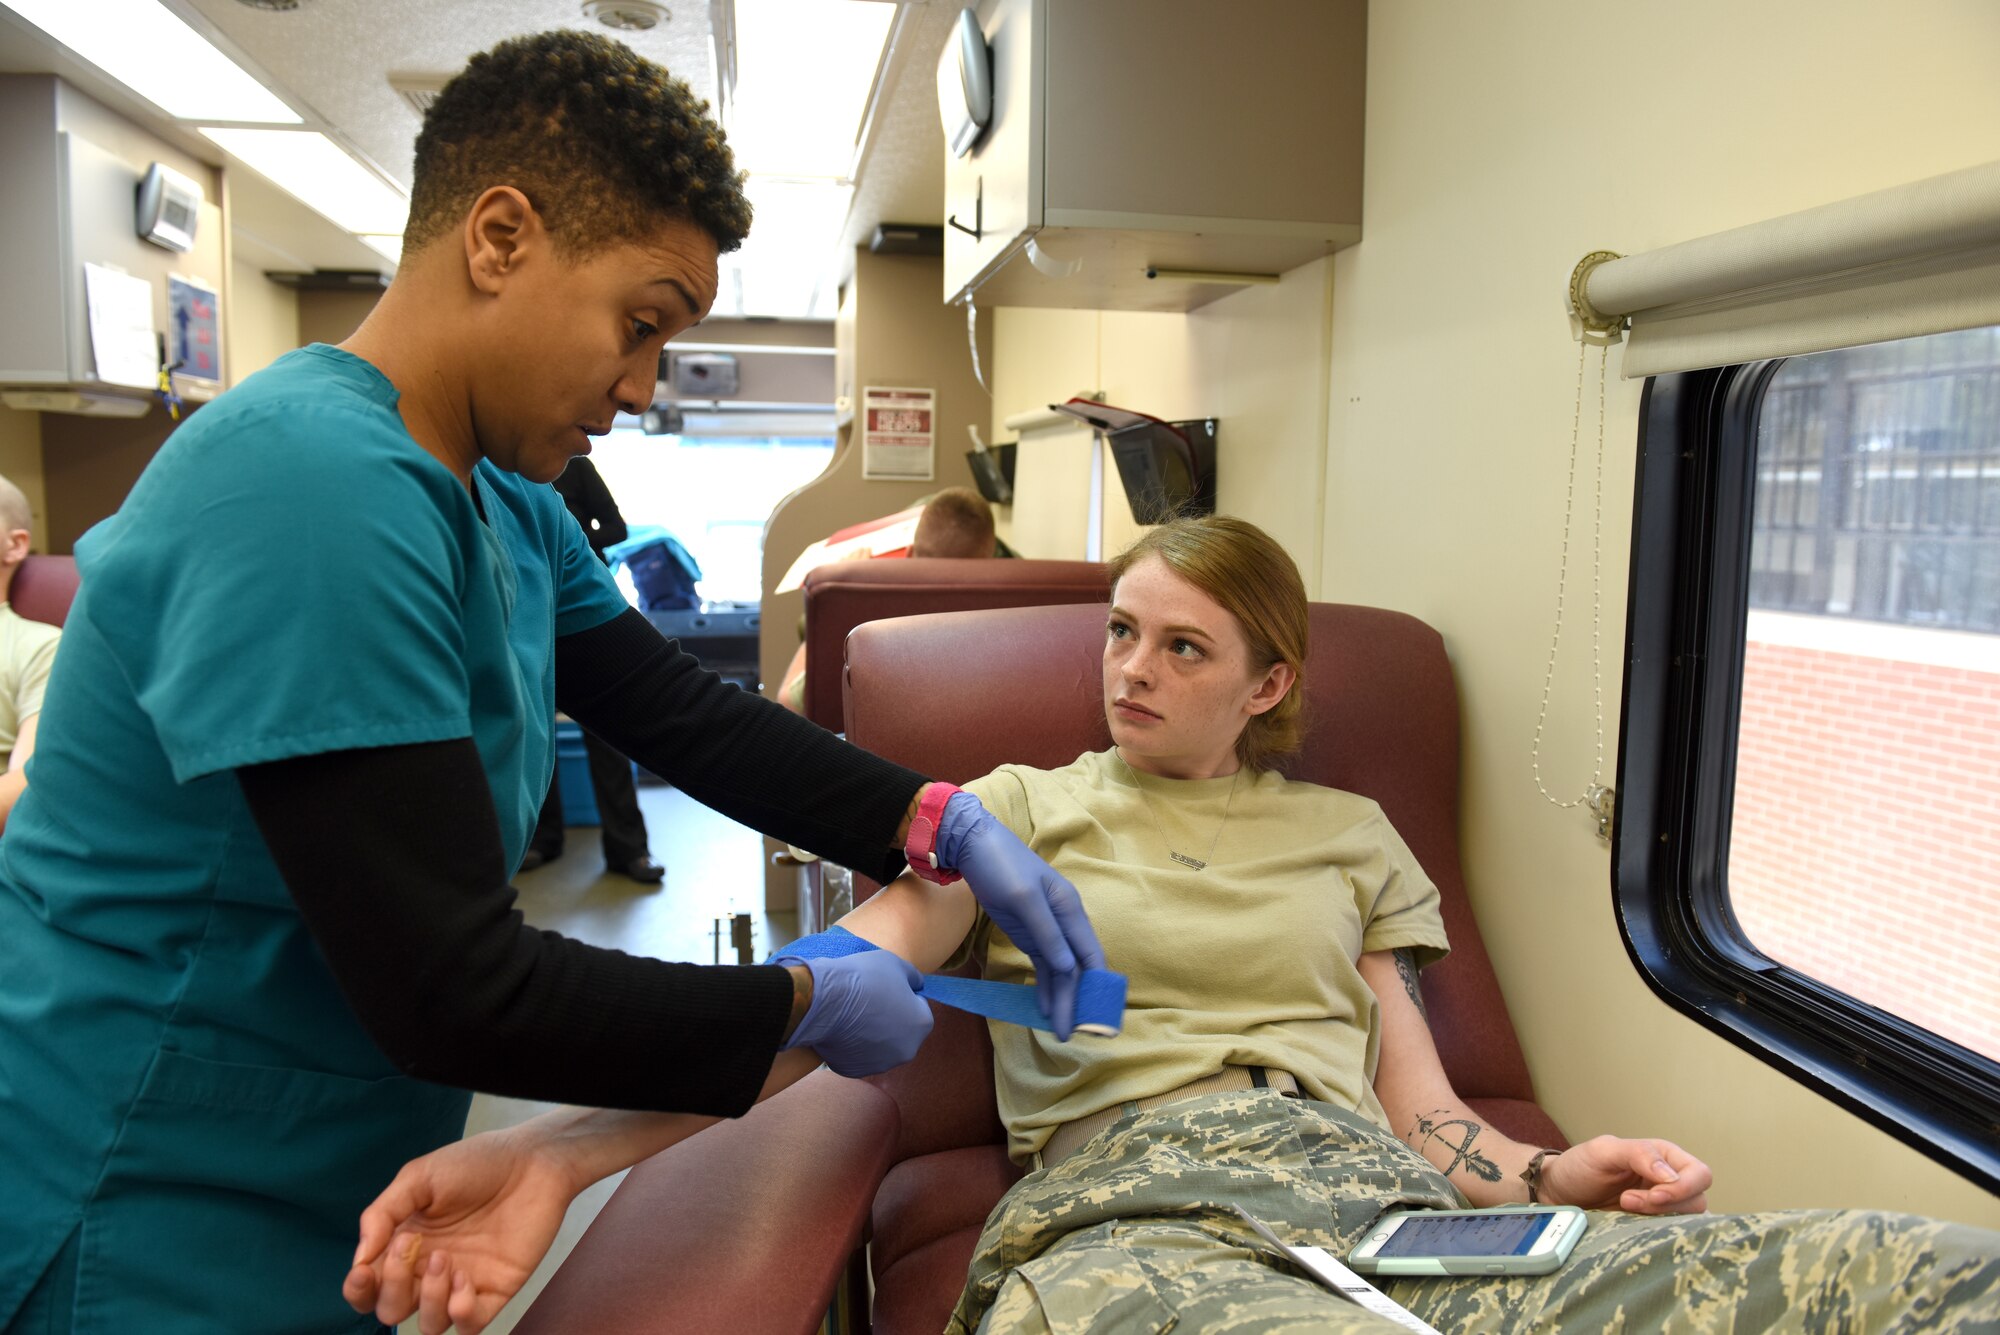 U.S. Air Force Airman First Class Kelly Wolvington (right), avionics technician with the 145th Maintenance Squadron, listens intently to directions given by Stephanie Williams (left), donor services technician with the Community Blood Center of the Carolinas (CBCC), following her blood donation in a mobile unit at the North Carolina Air National Guard (NCANG) Base, Charlotte Douglas International Airport, April 8, 2018. The CBCC has visited the base for the last four consecutive years collecting pints of blood for patients in need across North and South Carolina. (U.S. Air Force photo by Staff Sgt. Laura J. Montgomery/)